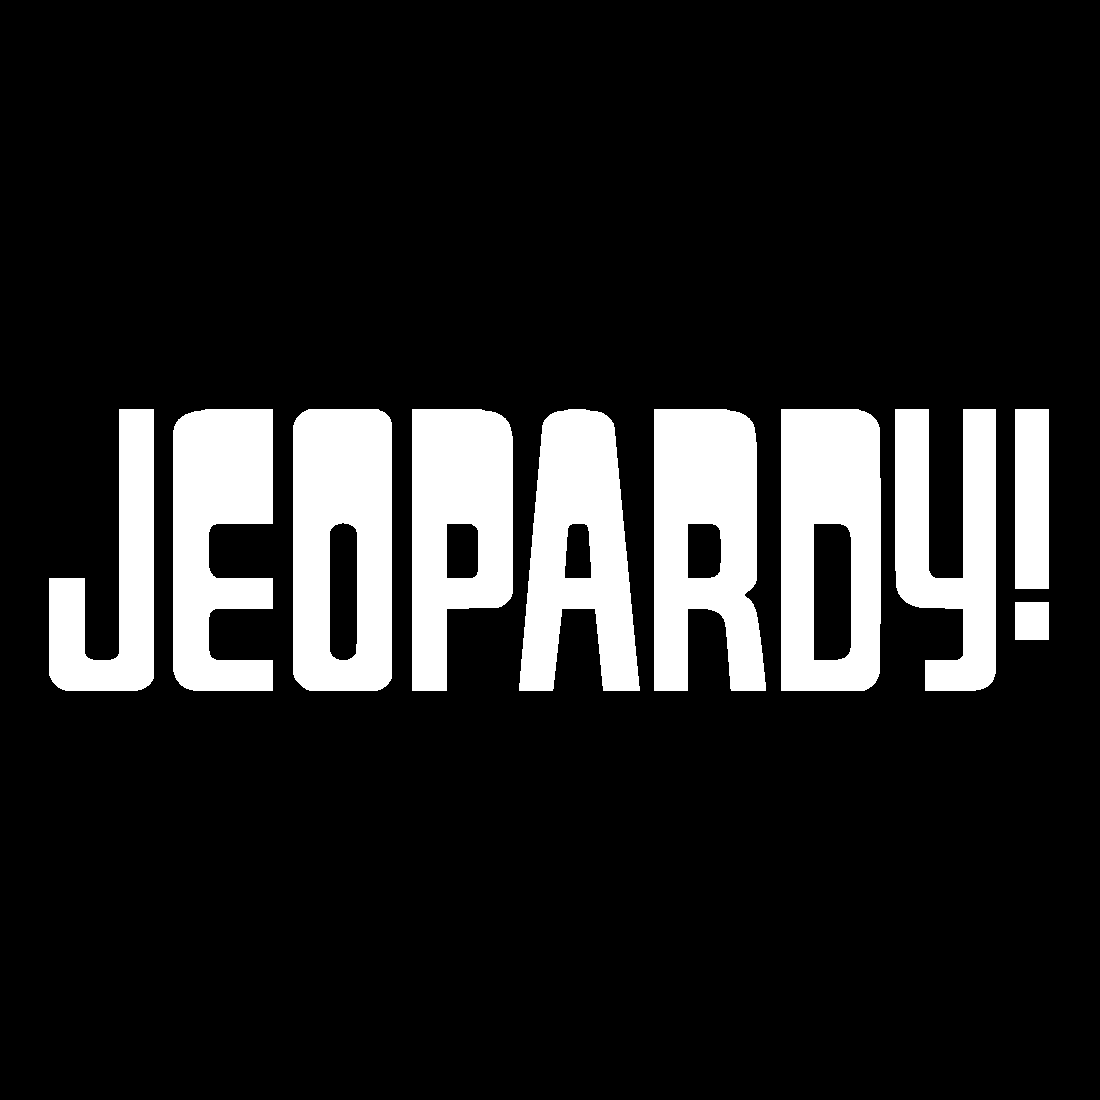 Black and White Letter Logo - Jeopardy!/Airdates | Game Shows Wiki | FANDOM powered by Wikia